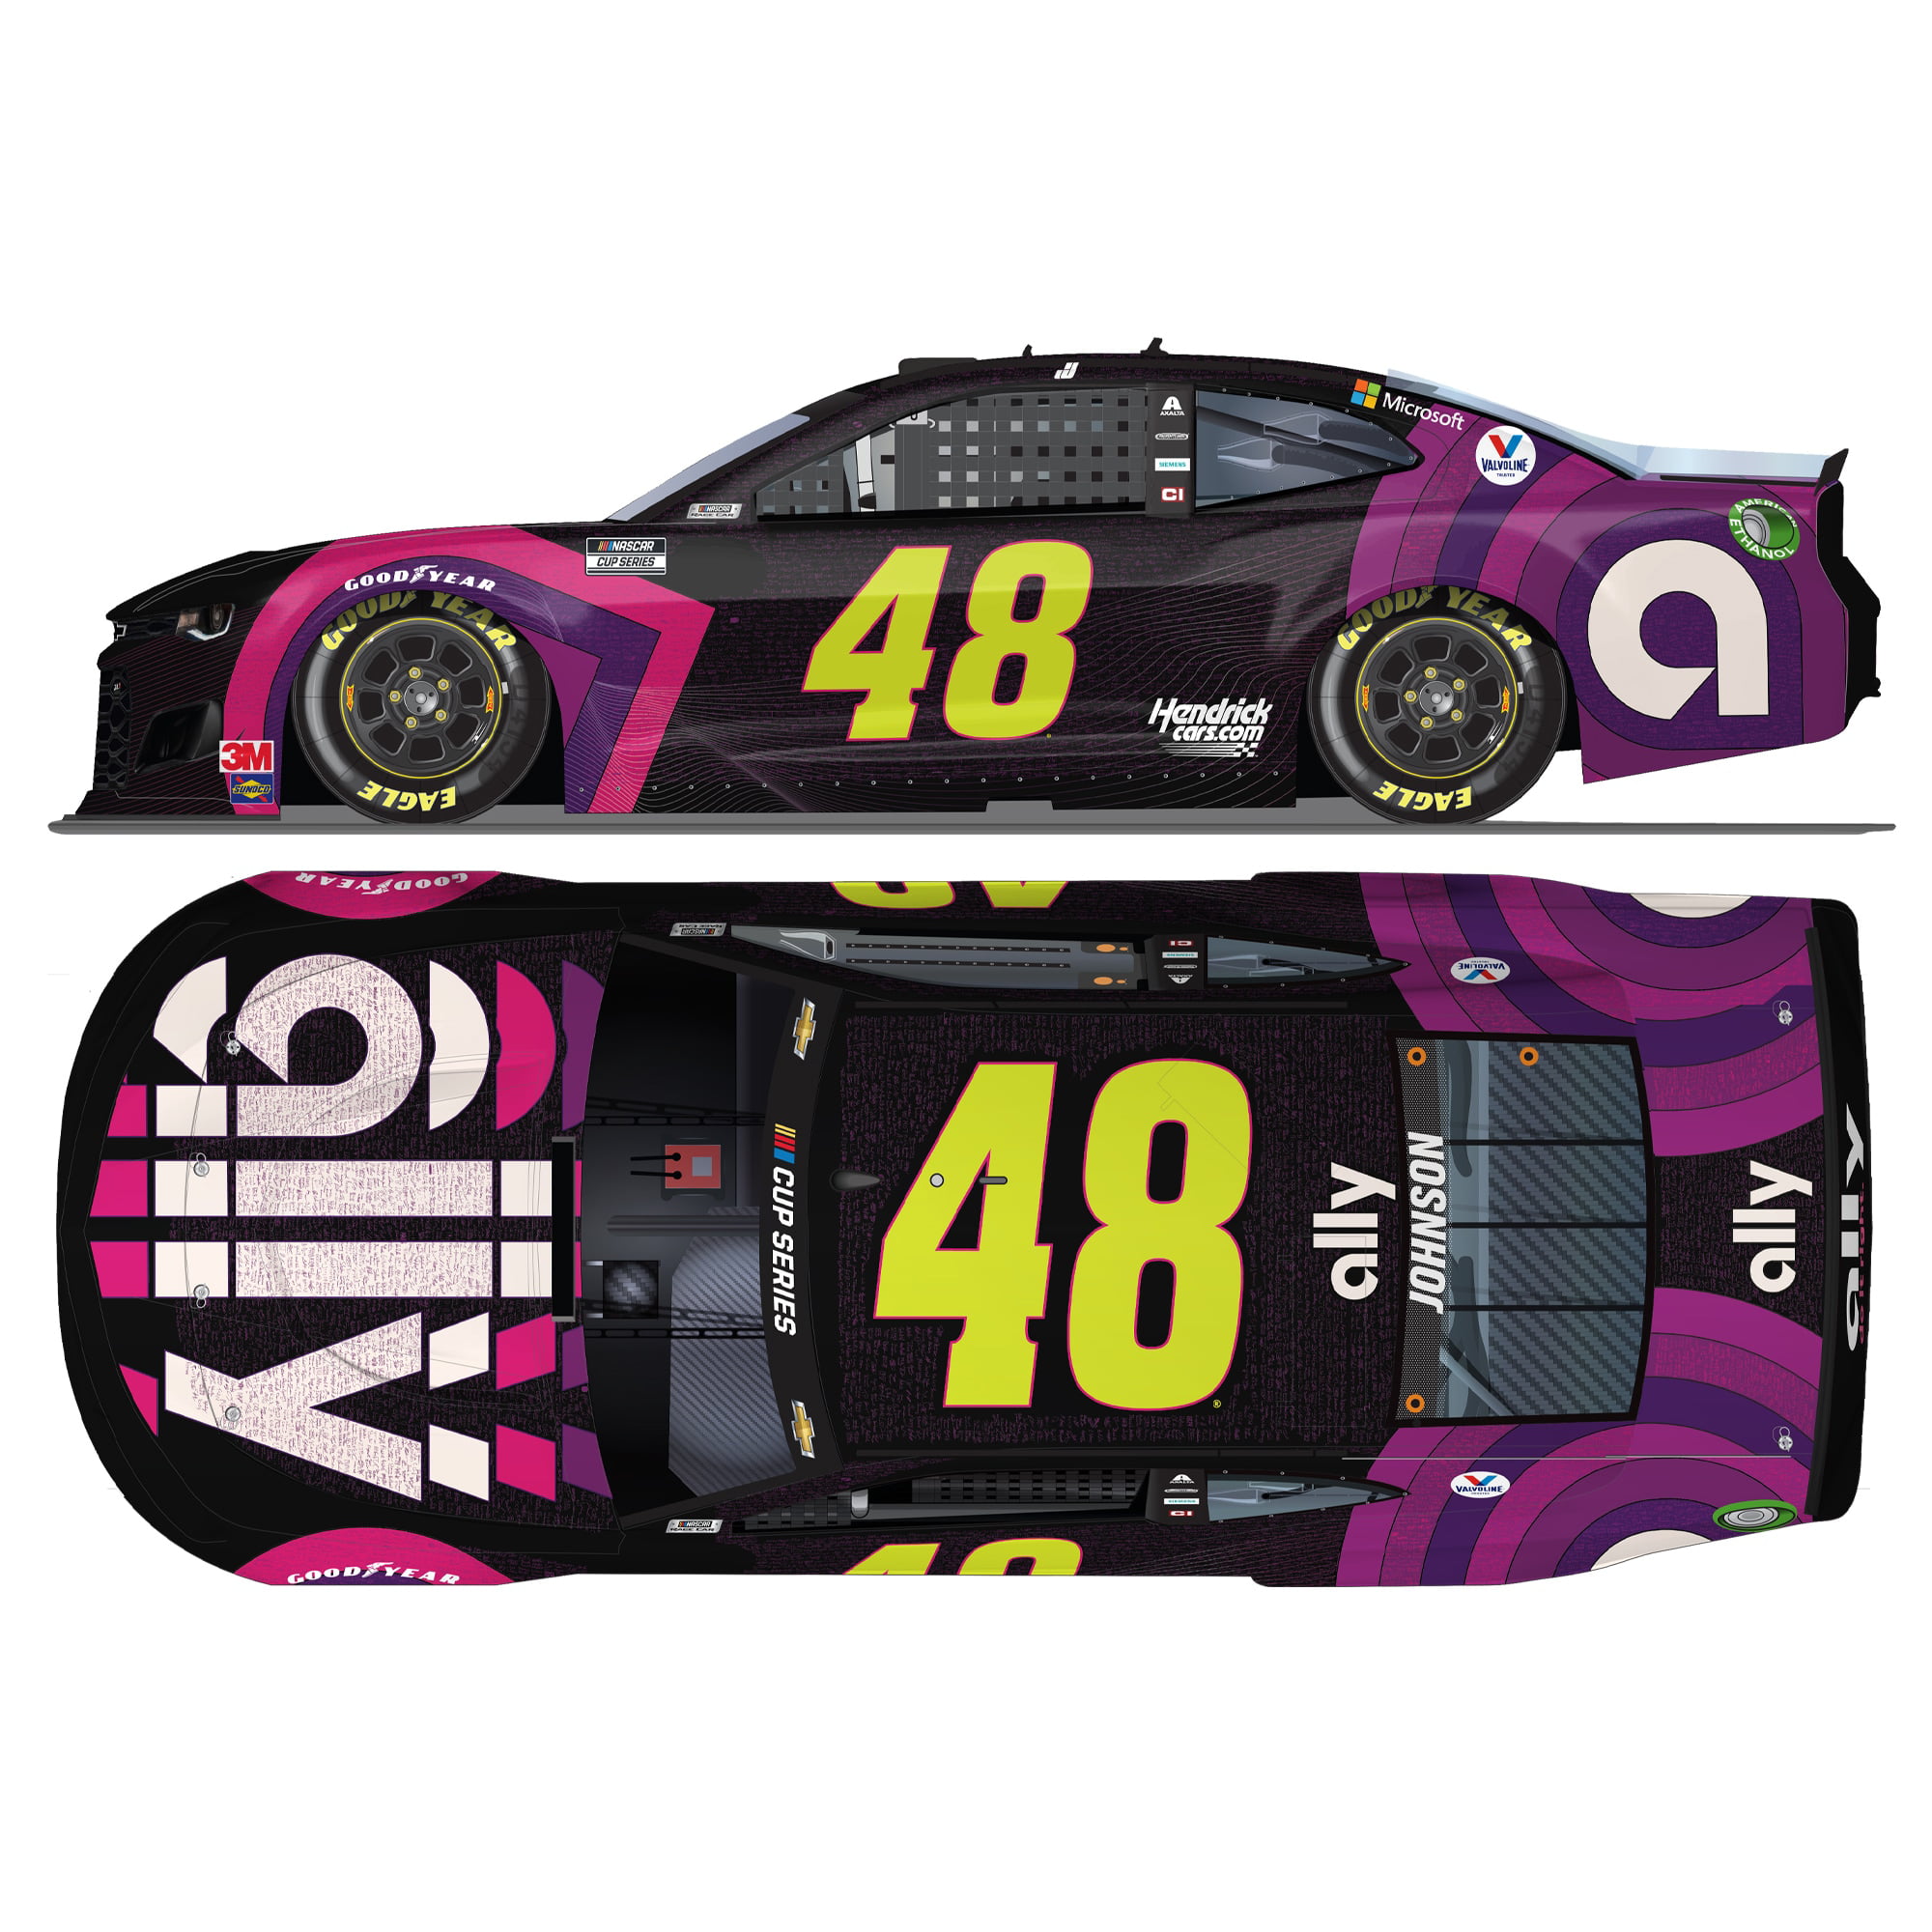 NASCAR 2019 JIMMIE JOHNSON  #48  ALLY FINANCIAL 1/24 CAR IN STOCK NOW 